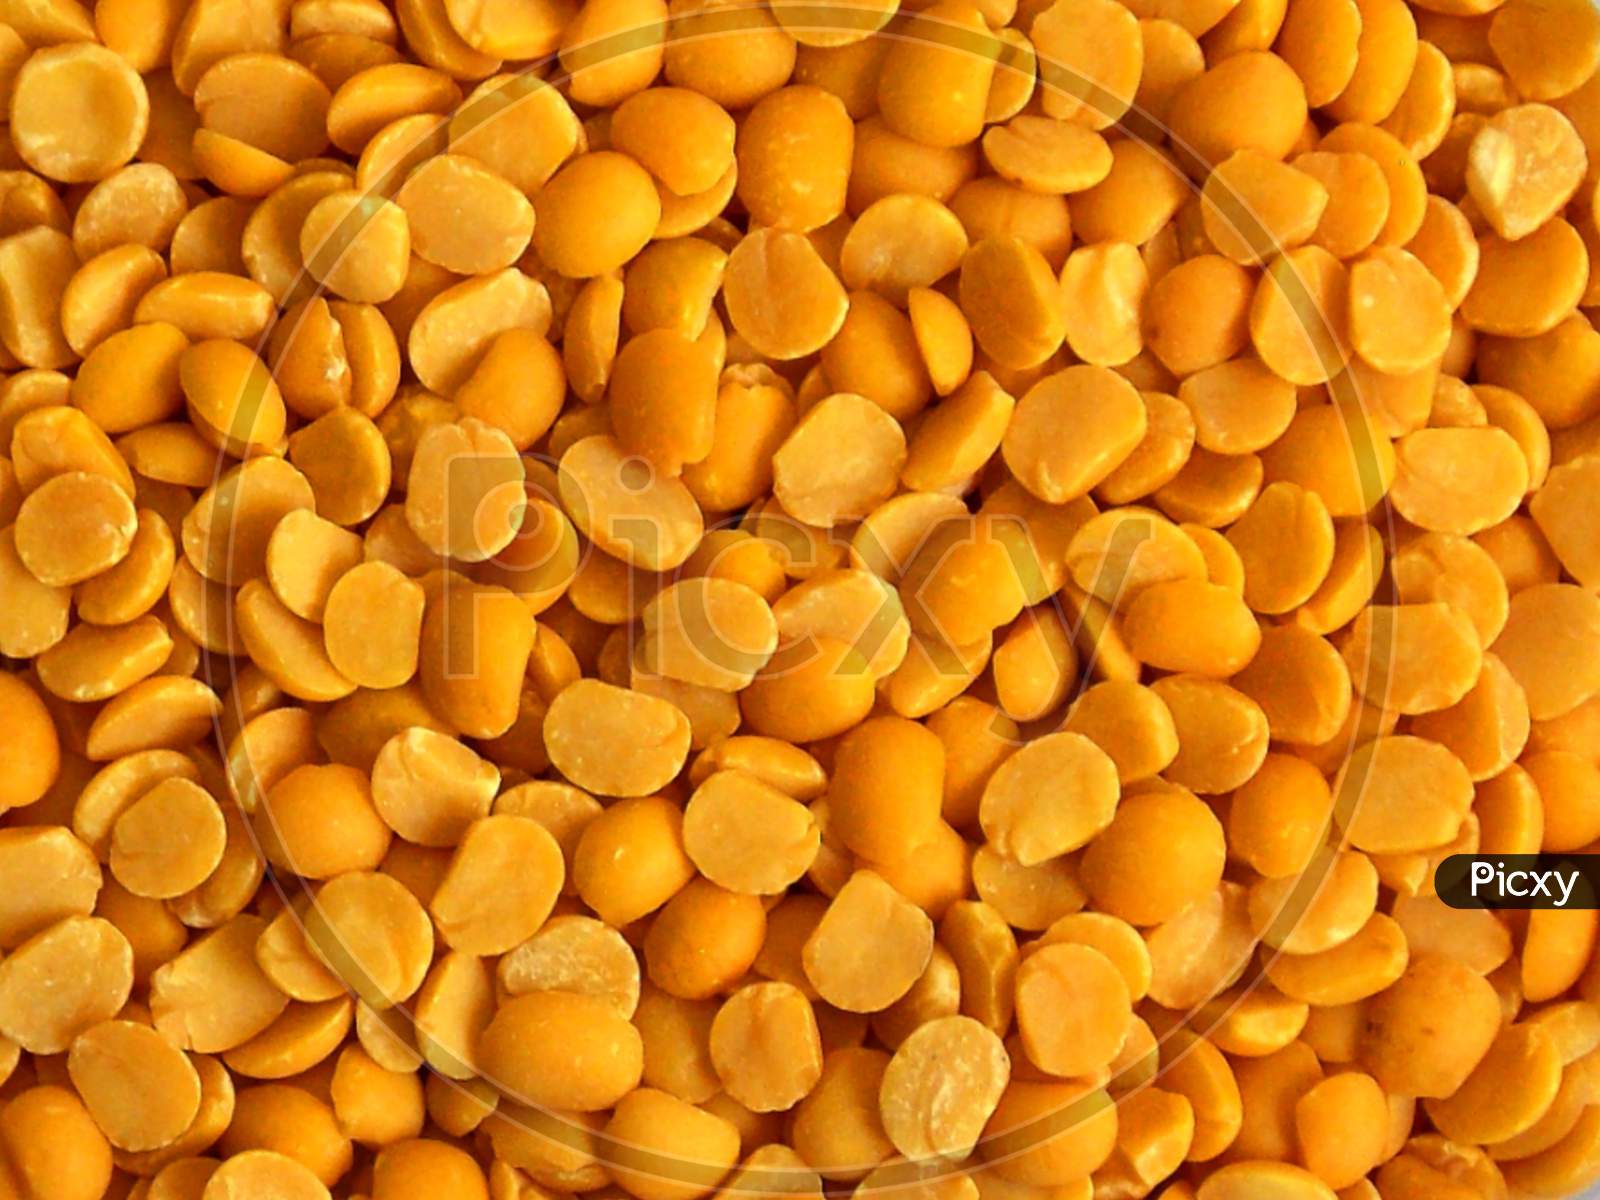 Yellow chopped peas close up,background of yellow peas.Yellow split chickpea peas boot chana dal lentil pulse bean on white background,top view.healthy food.